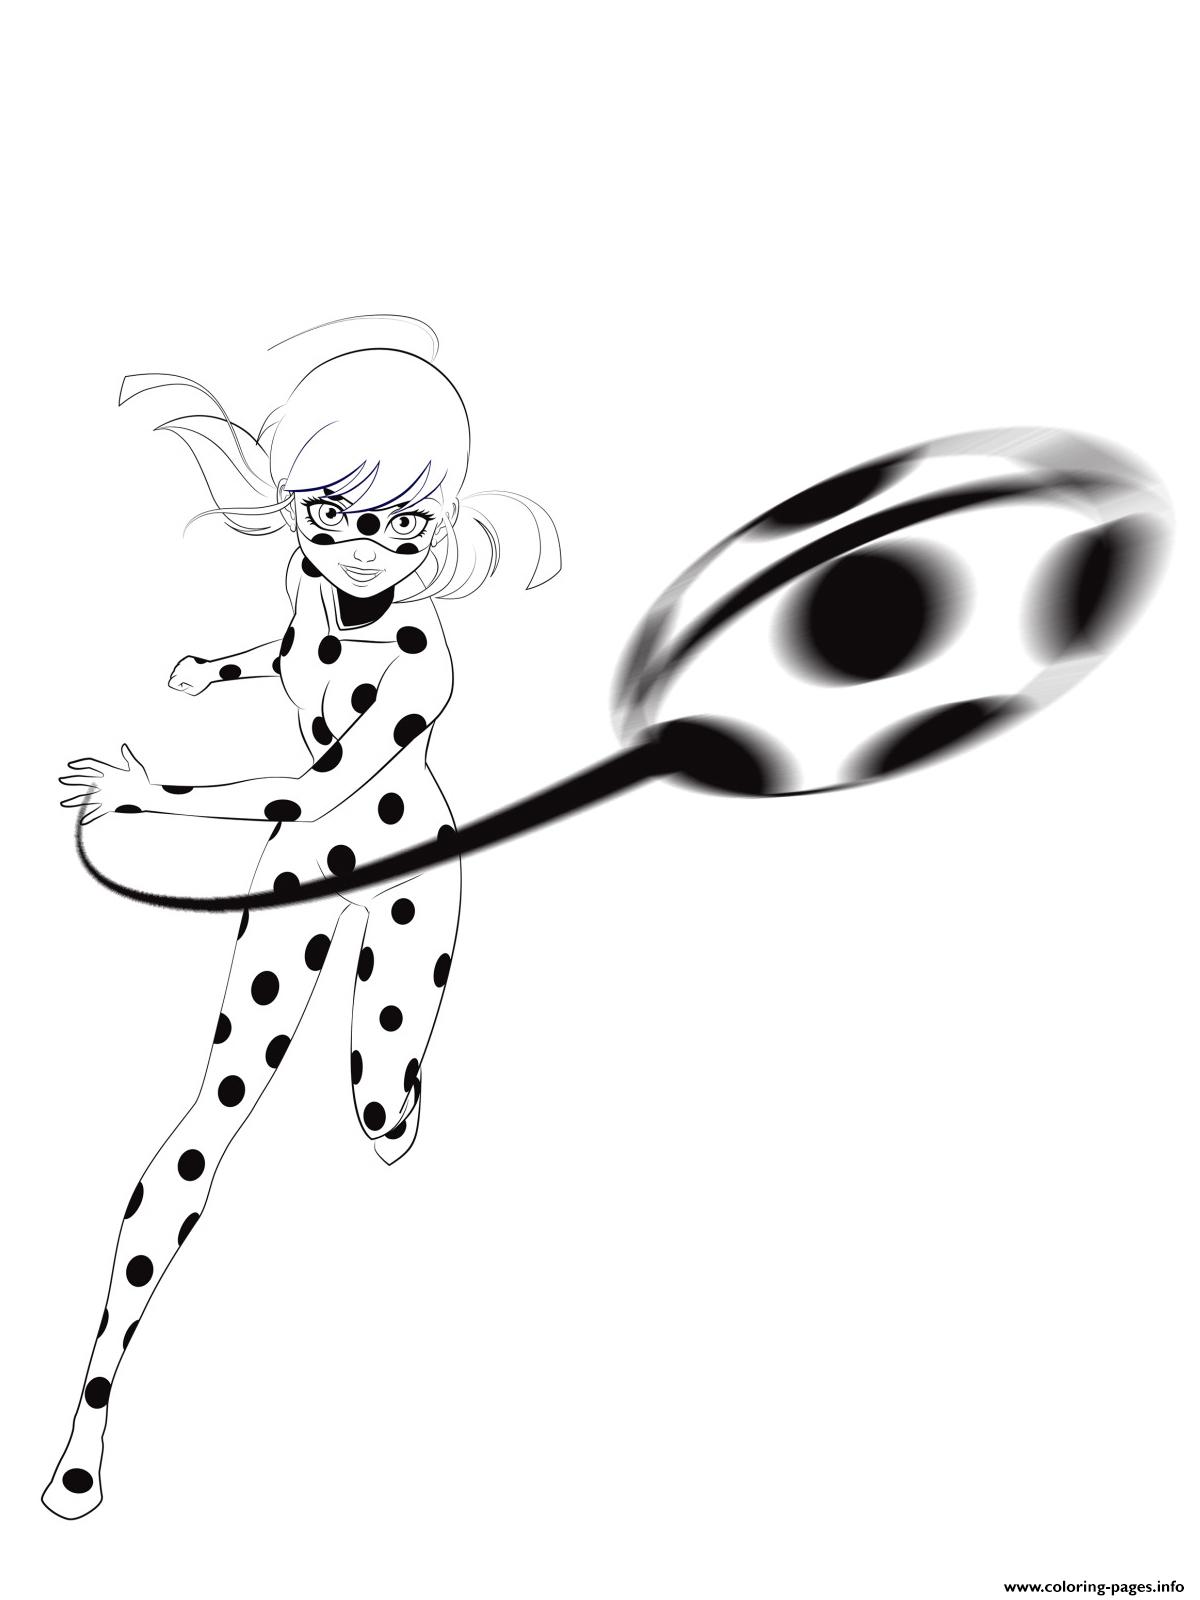 Miraculous Ladybug 2 coloring pages